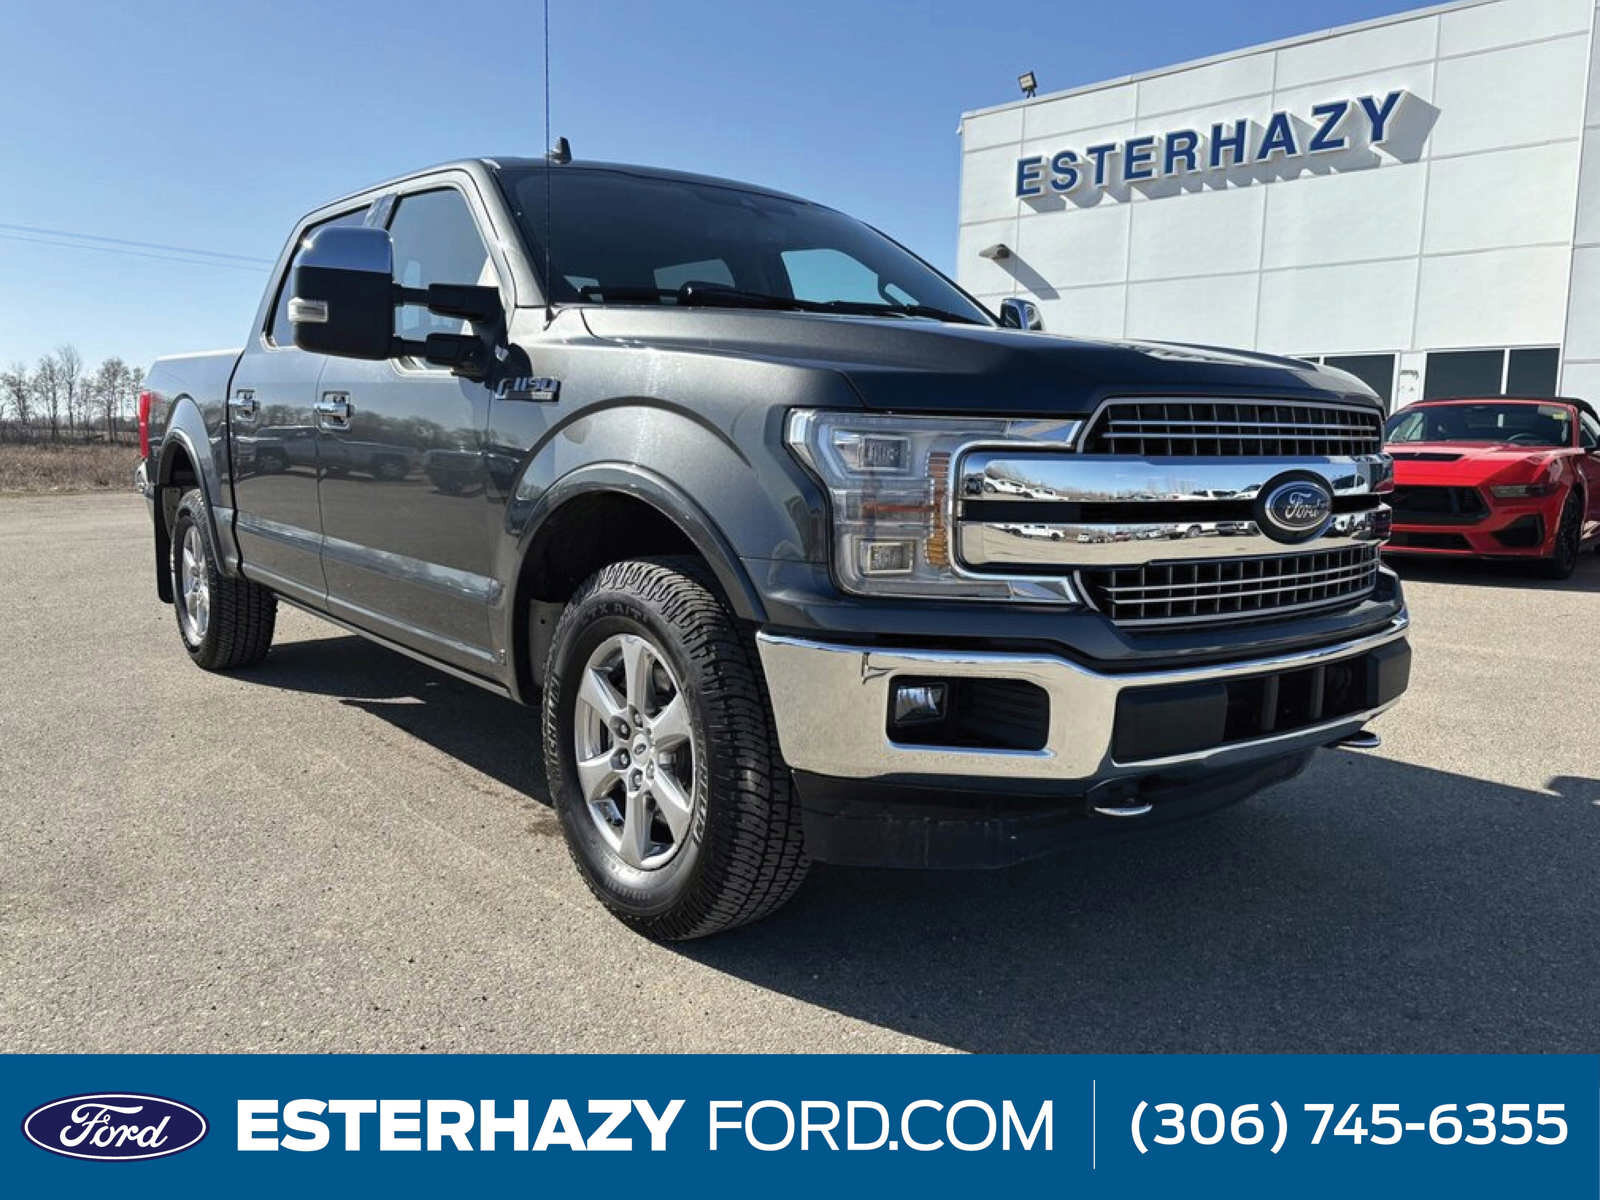 2018 Ford F-150 LARIAT | HEATED SEATS | REMOTE START | NAVIGATION